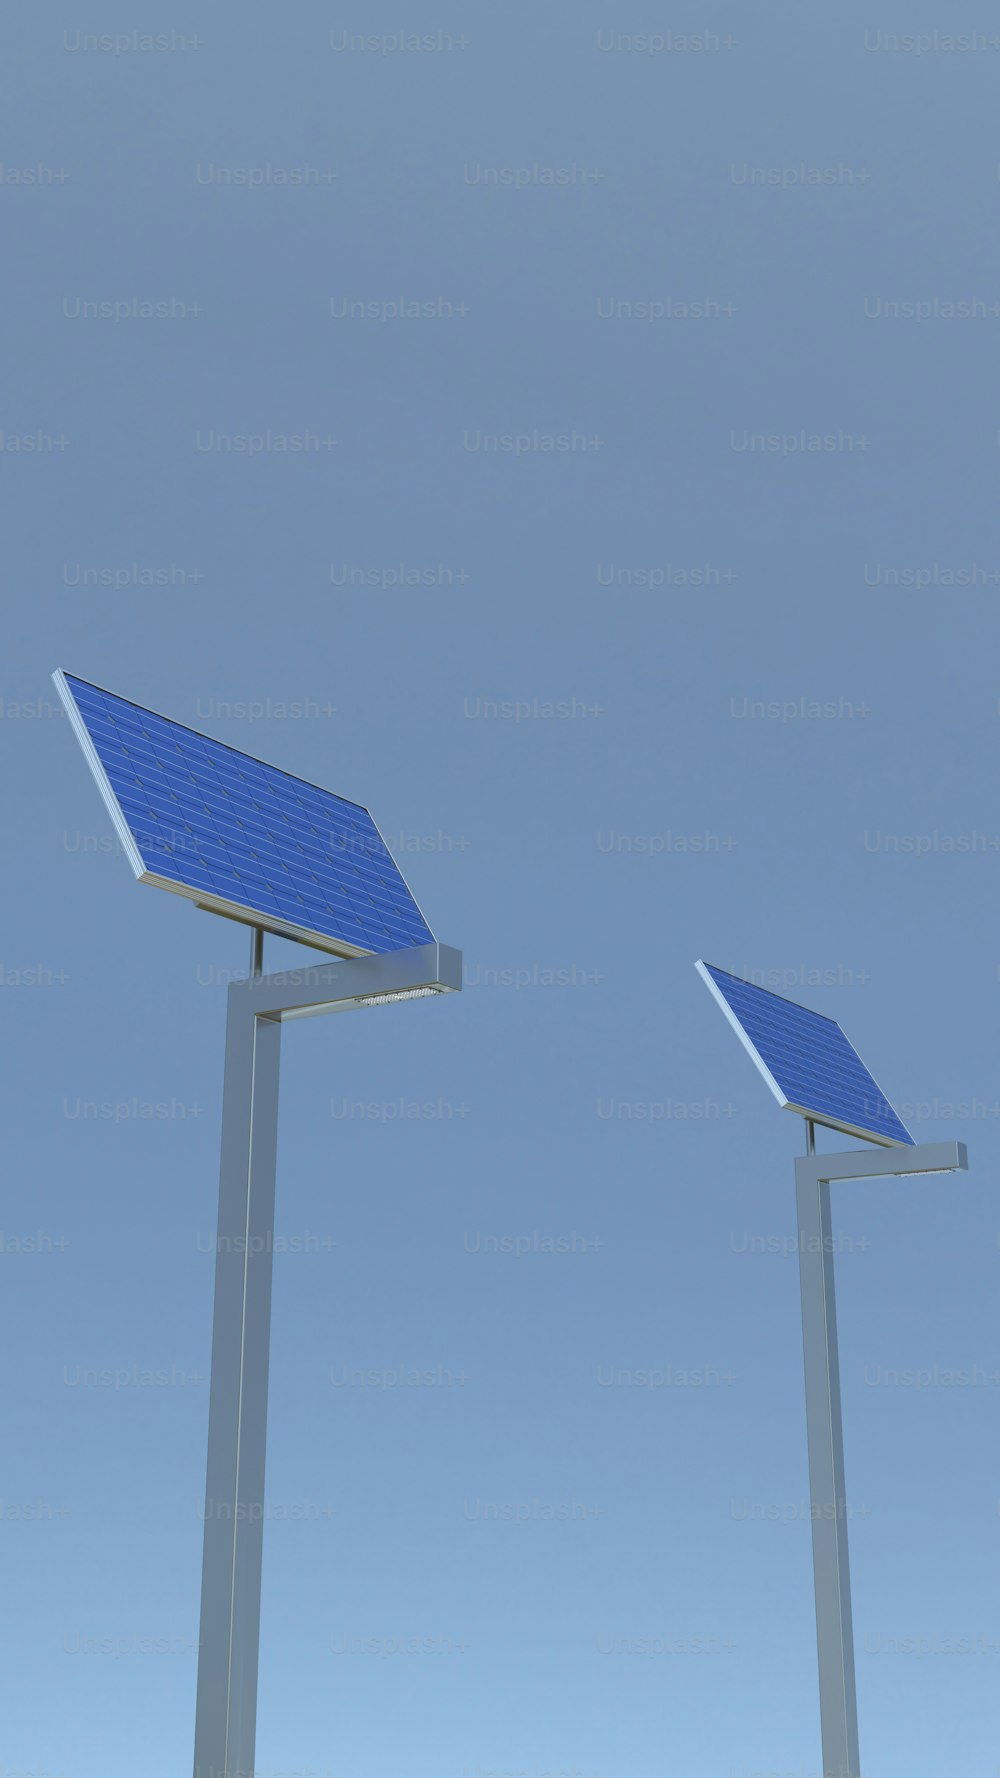 two solar panels on poles against a blue sky